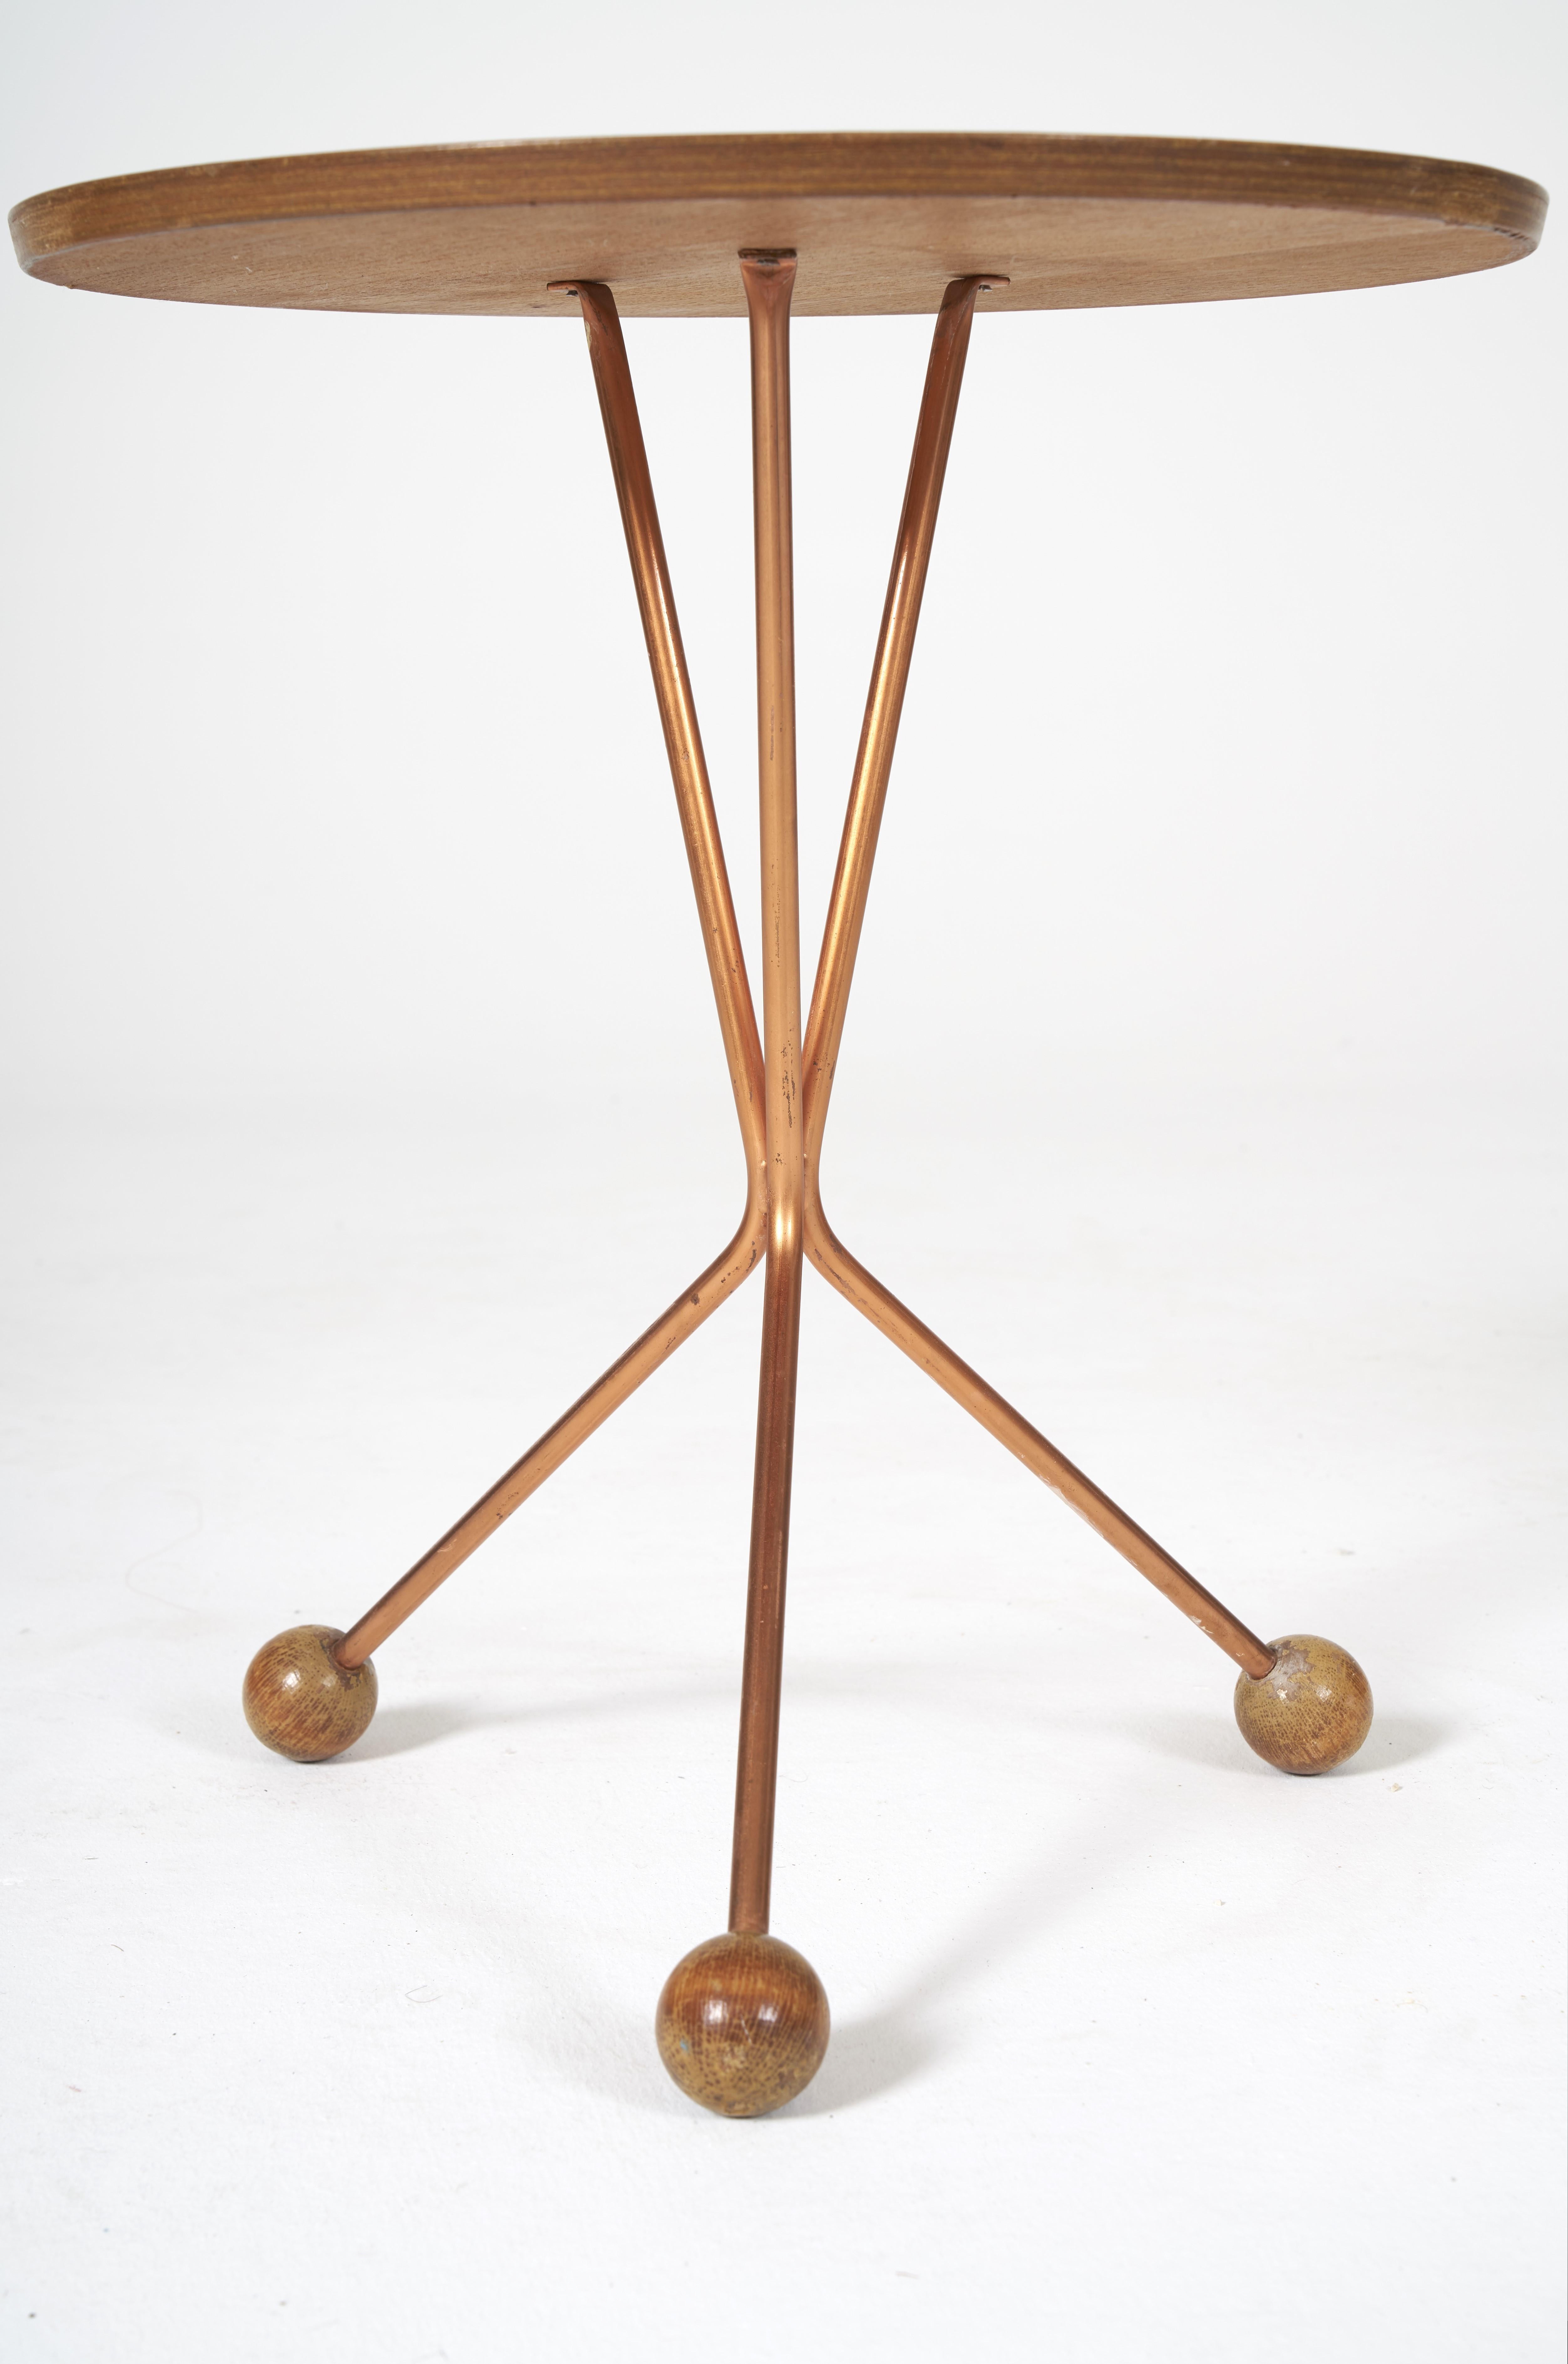 French Pair of Alberts teak side tables by Albert Larsson.